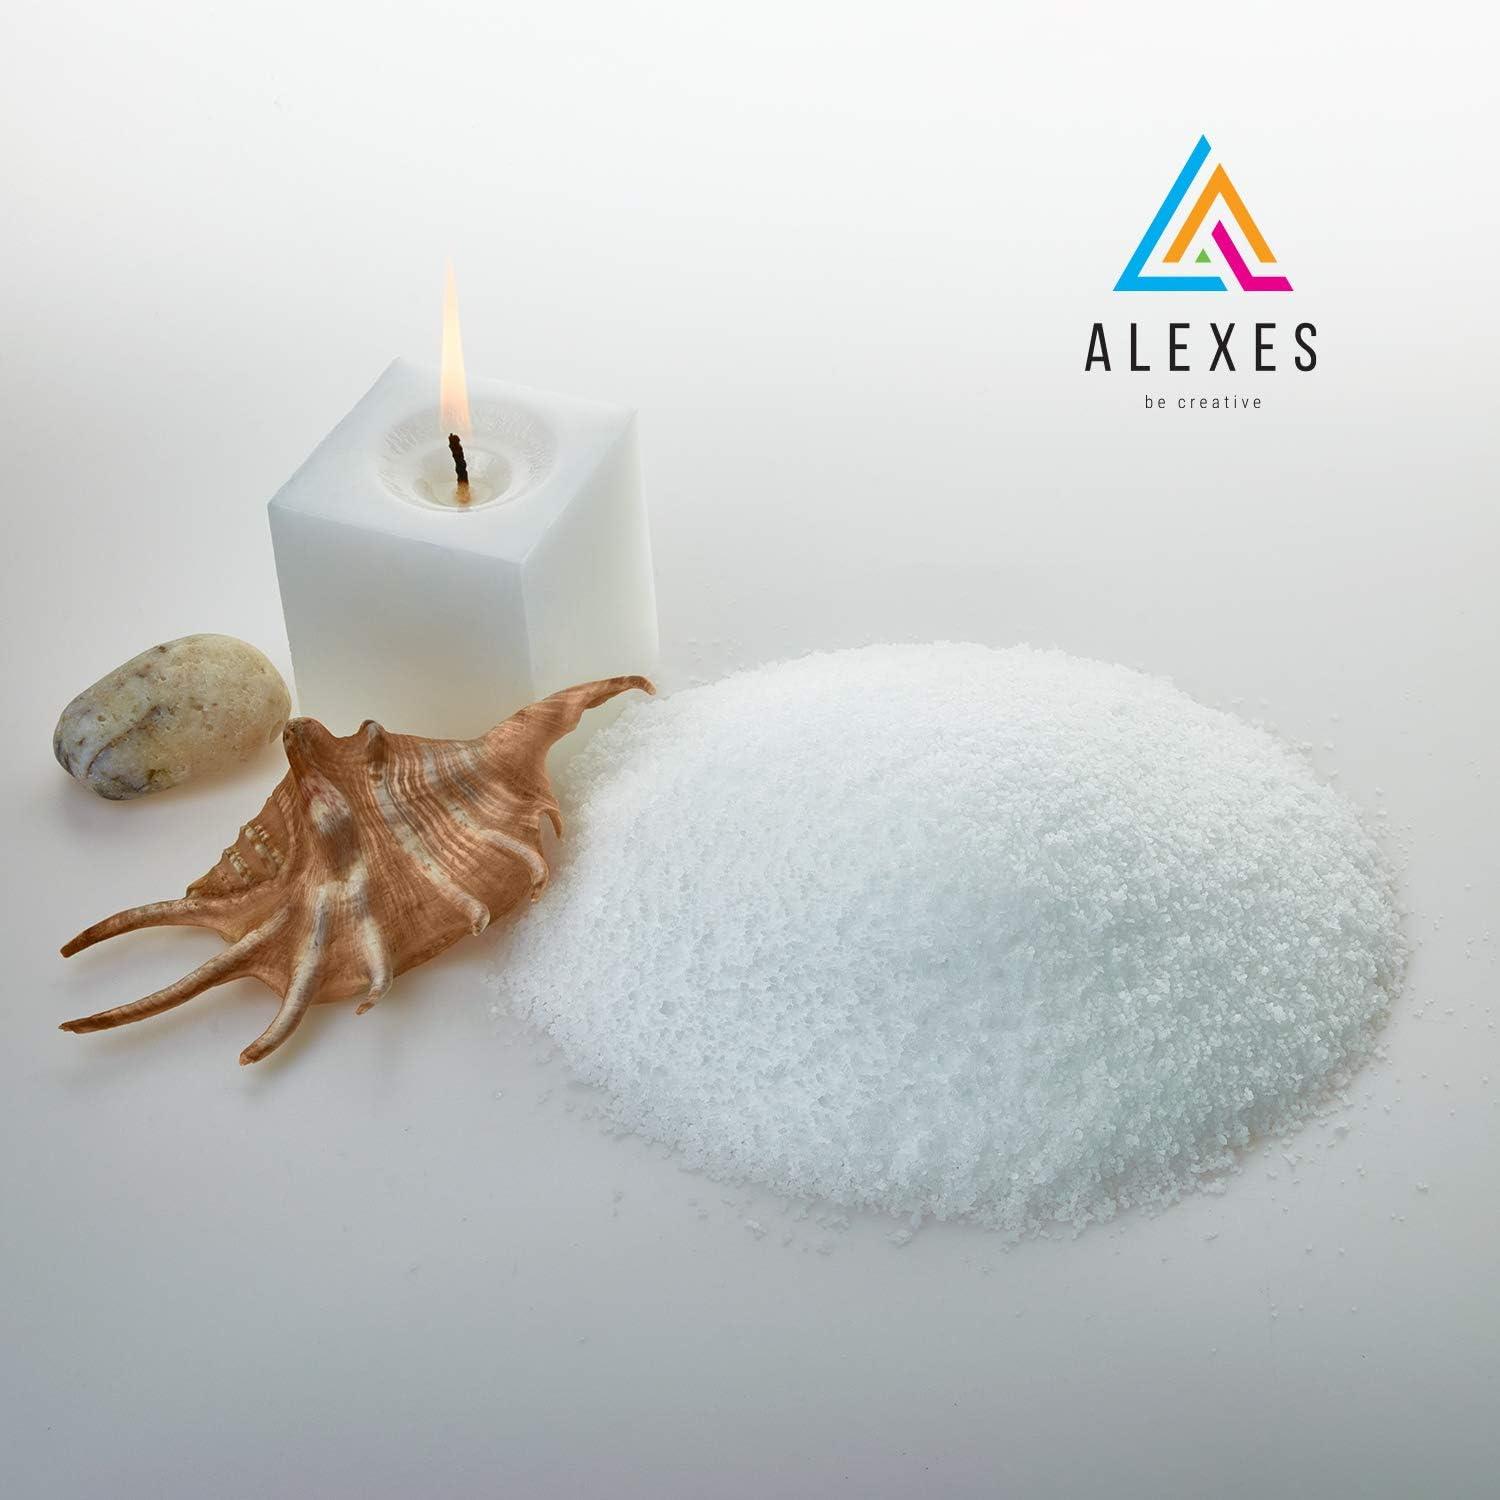 ALEXES Paraffin Wax for Candle Making - Unscented Candle Wax - Candle Making  Wax for Crafts - Paraffin Candle Wax Melts Paraffin for Crafts - 1lb  Paraffin Wax Flakes 1 lb